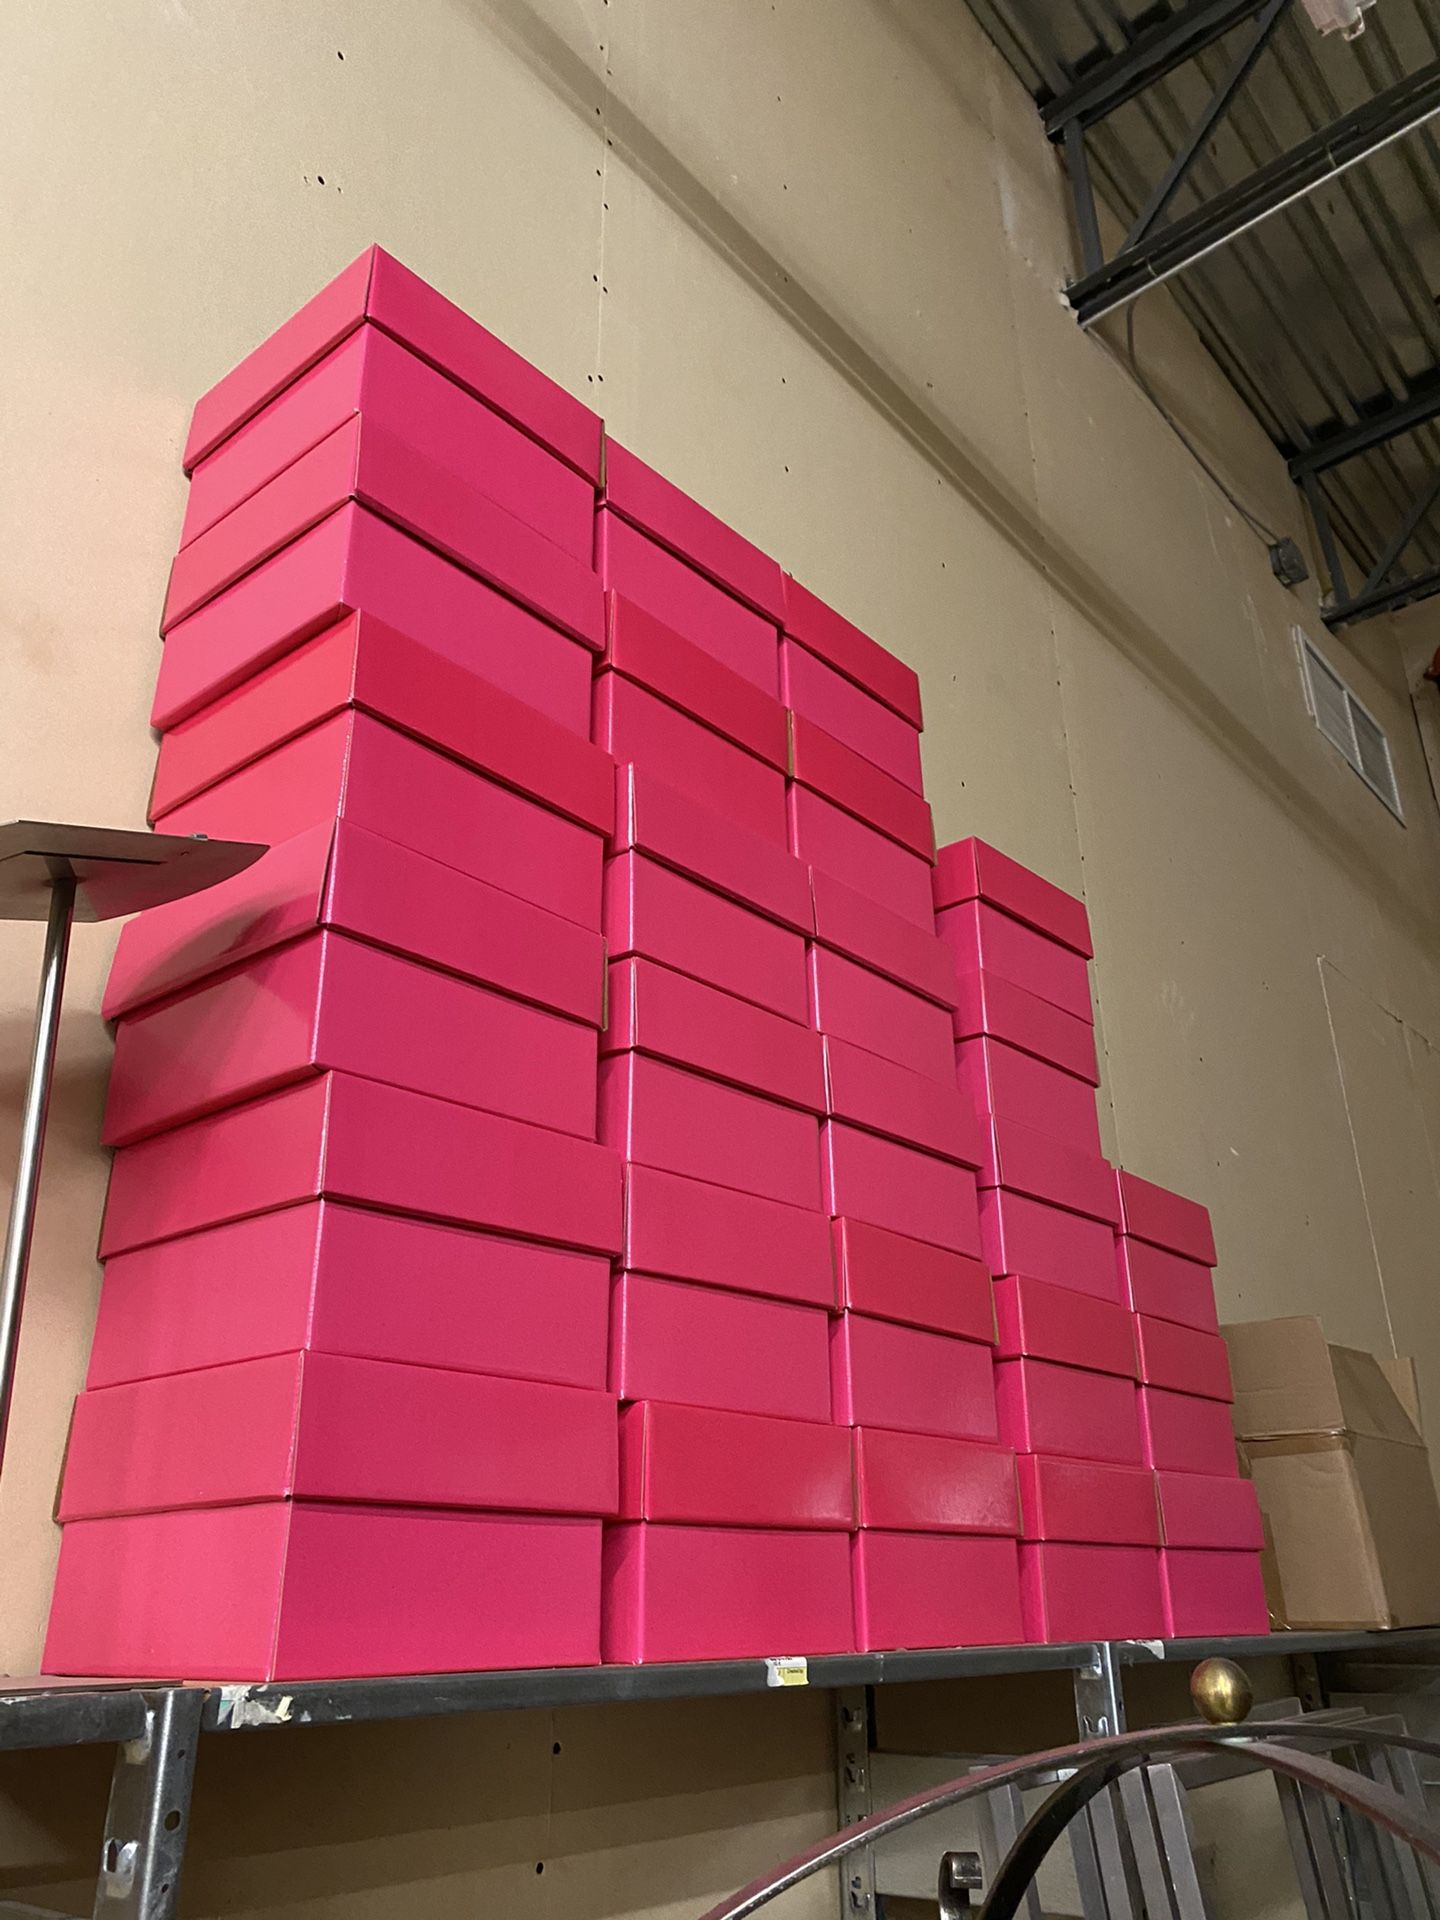 Pink boxes